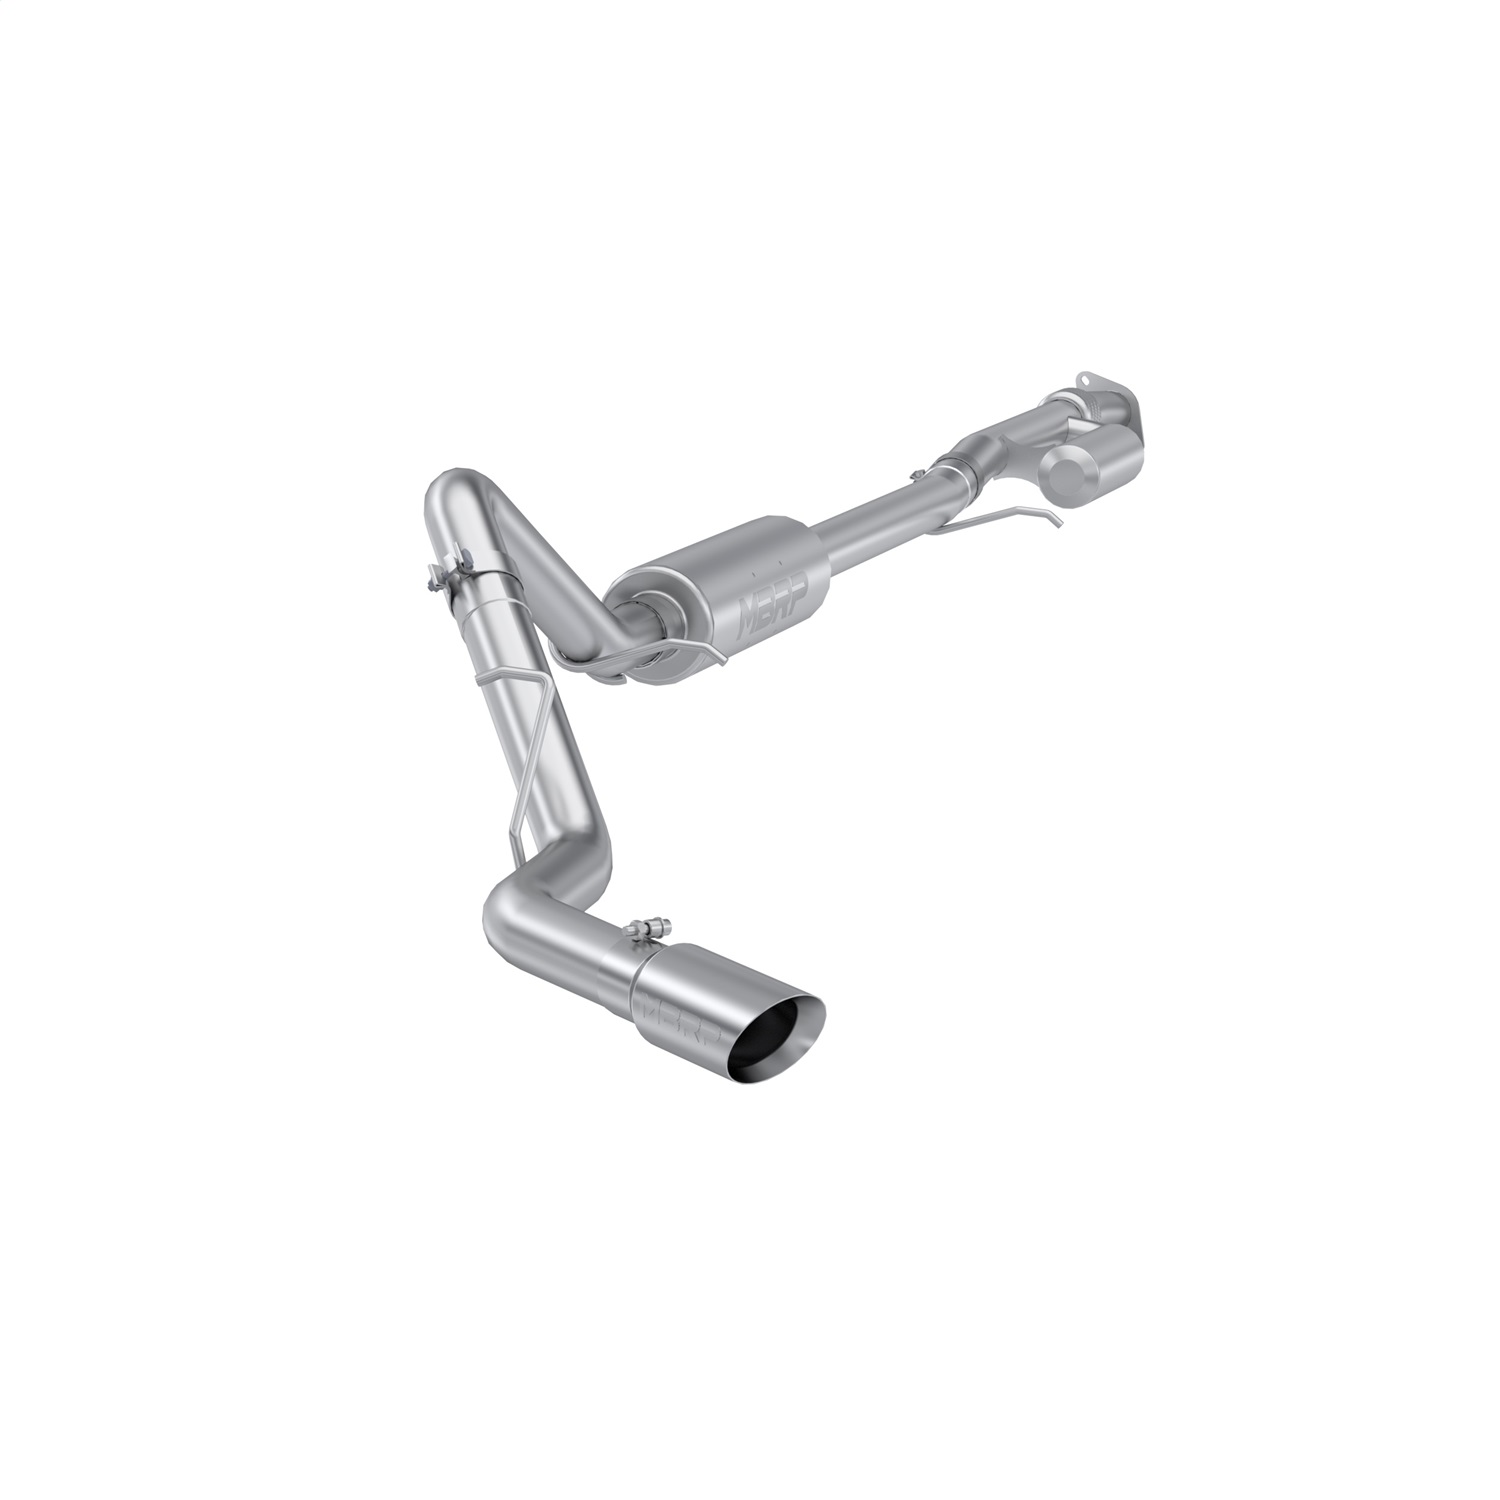 MBRP Exhaust S5019304 Armor Pro Cat Back Exhaust System